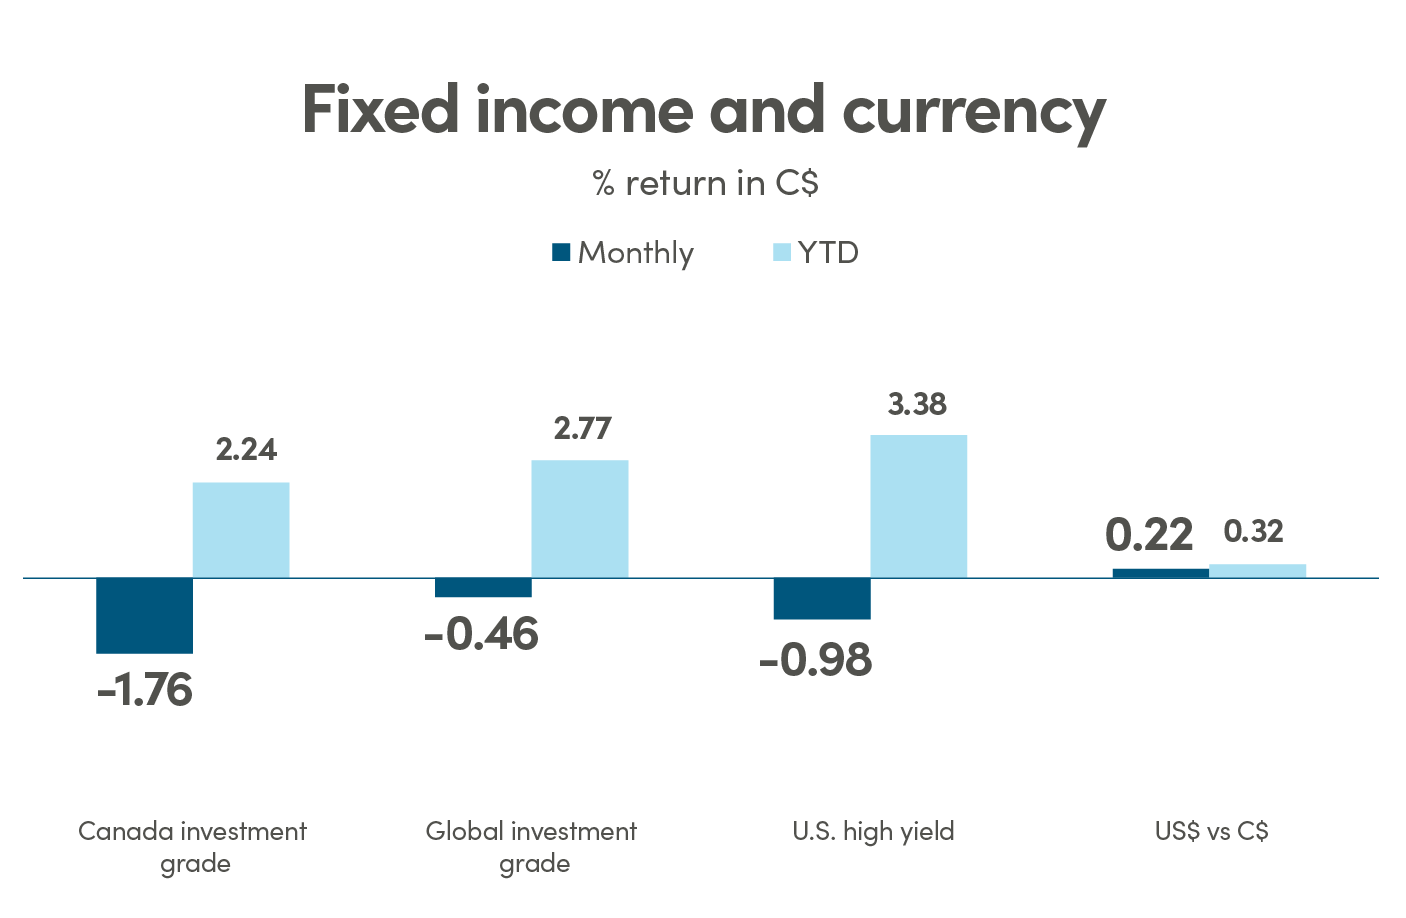 Bar graph showing % return in CAD (C$) for fixed income and currency. Canada investment grade monthly return is 0.97% and YTD is 4.07%. Global investment grade monthly return is 0.47% and YTD is 3.24%. US high yield monthly return is 0.96% and YTD is 4.41%. US$ vs C$ monthly return is 0.22% and YTD is 0.10%